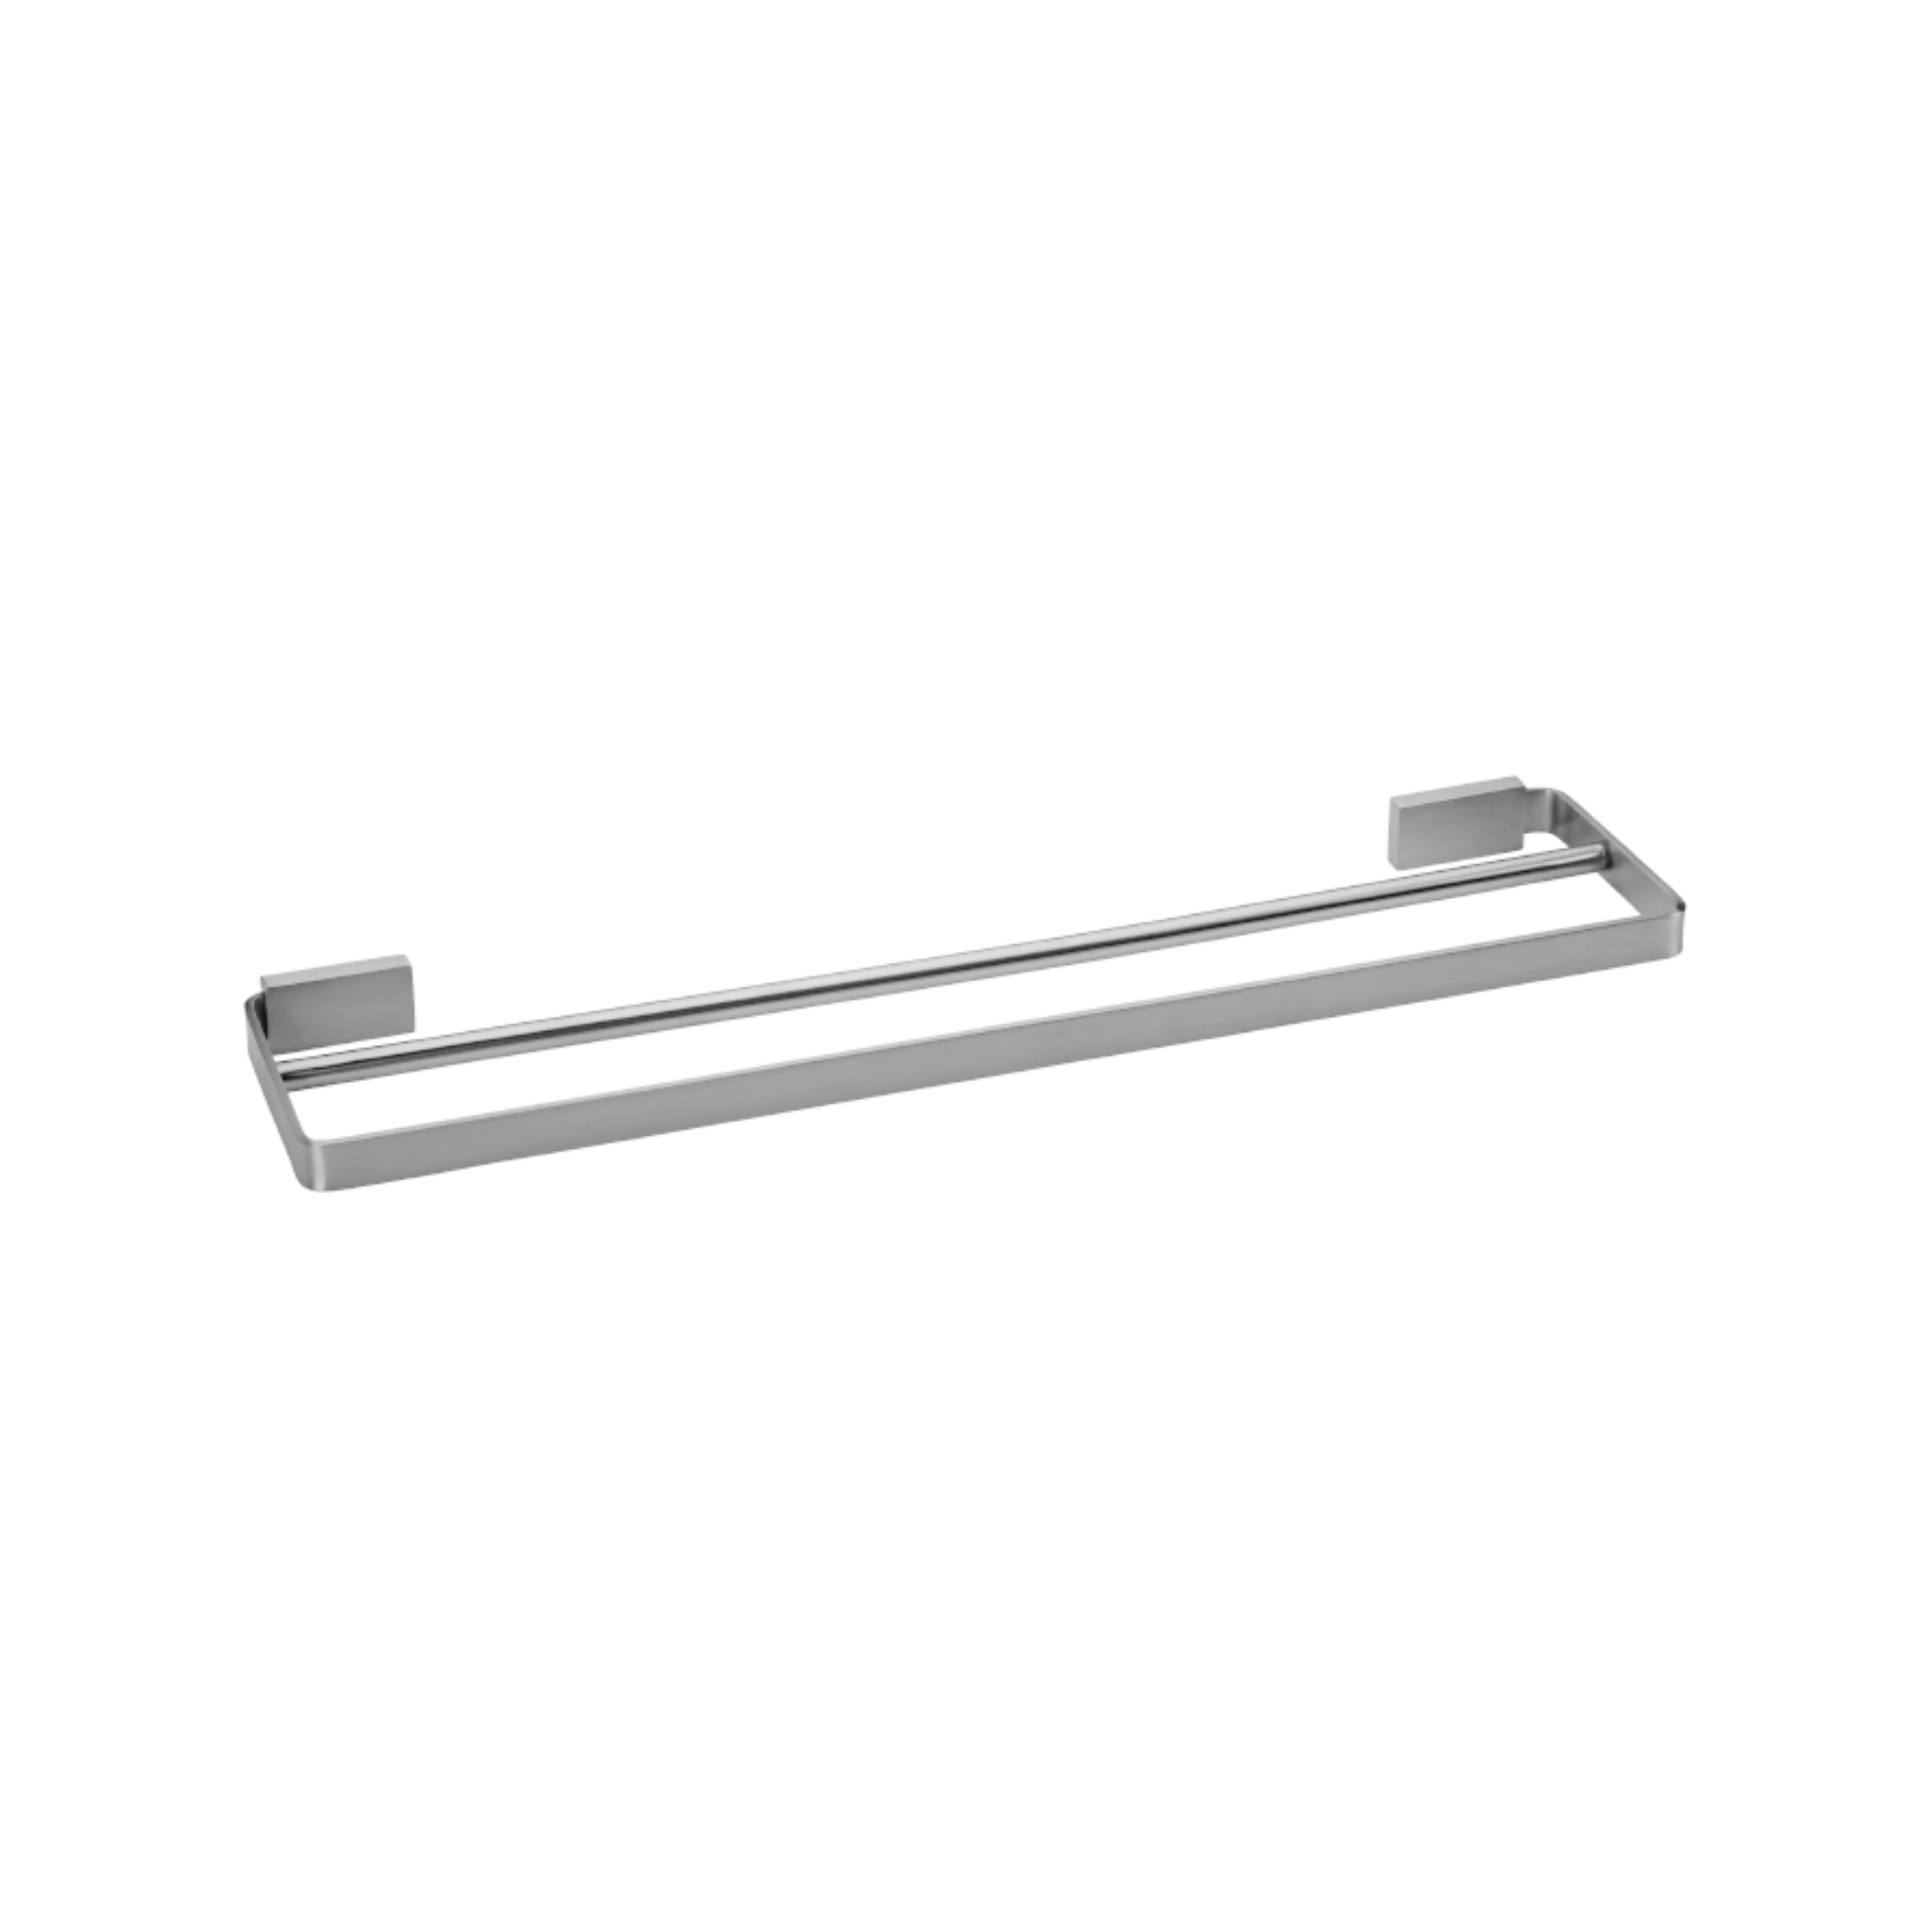 QS1524/SSS, Rail, Double Towel, Square, Satin Stainless Steel, QS